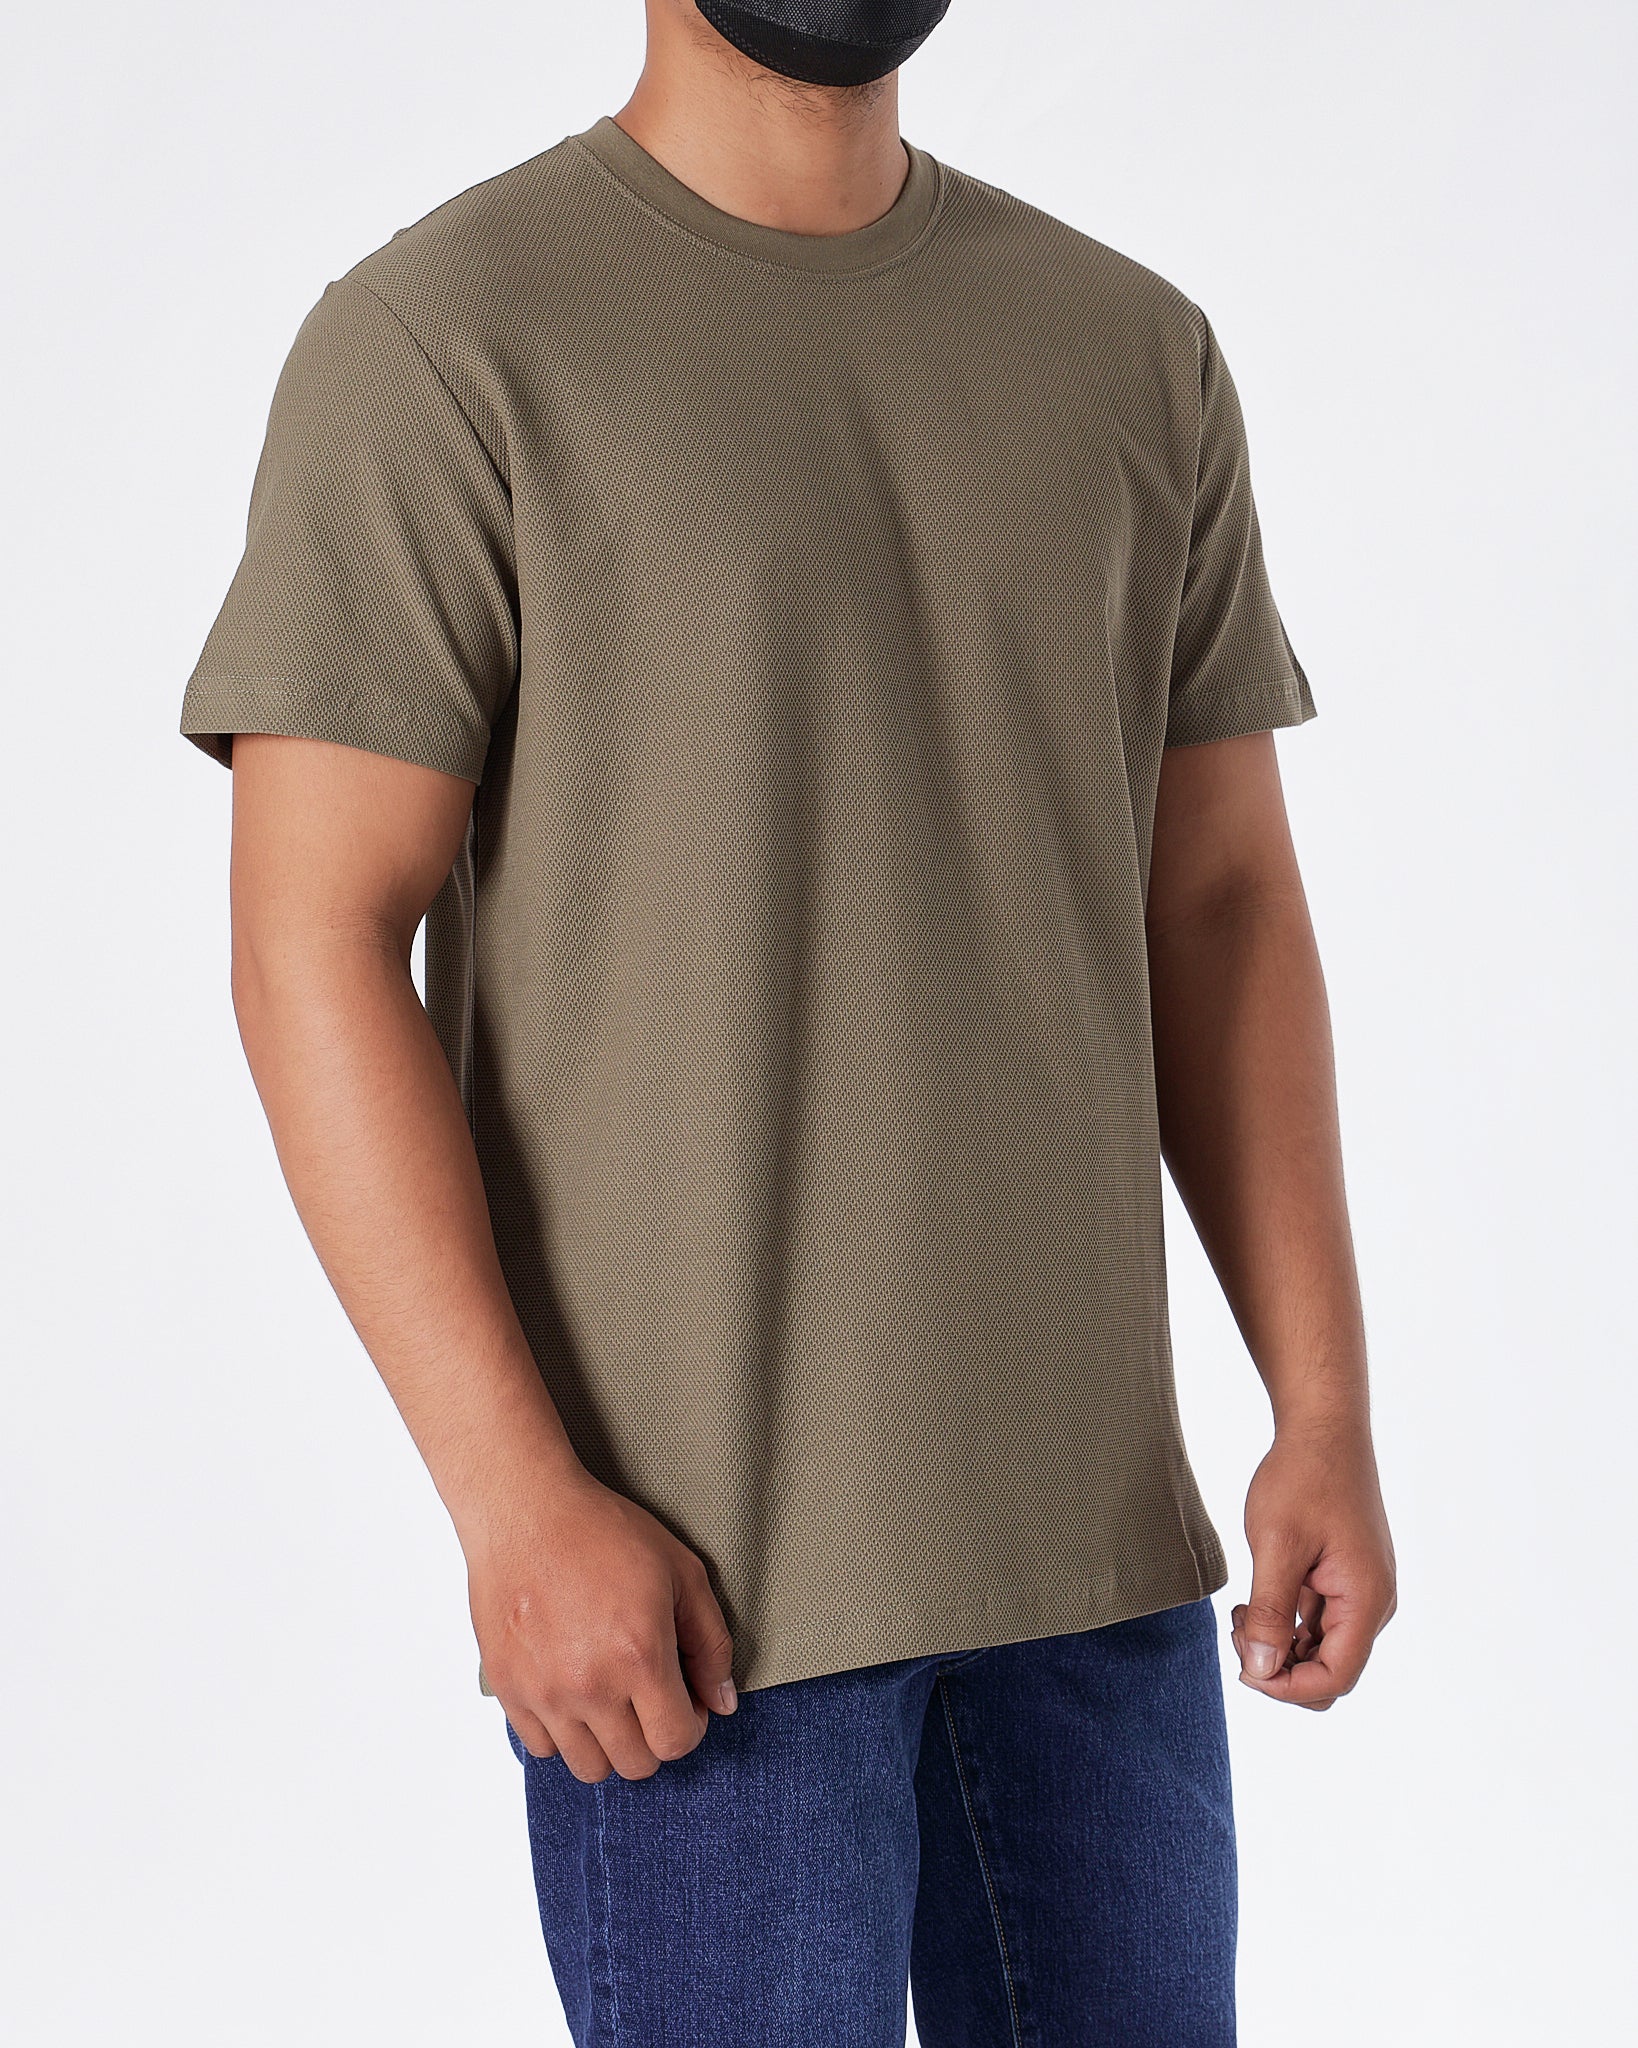 MOI OUTFIT-ABA Solid Color Comfort Men Grey T-Shirt 14.90